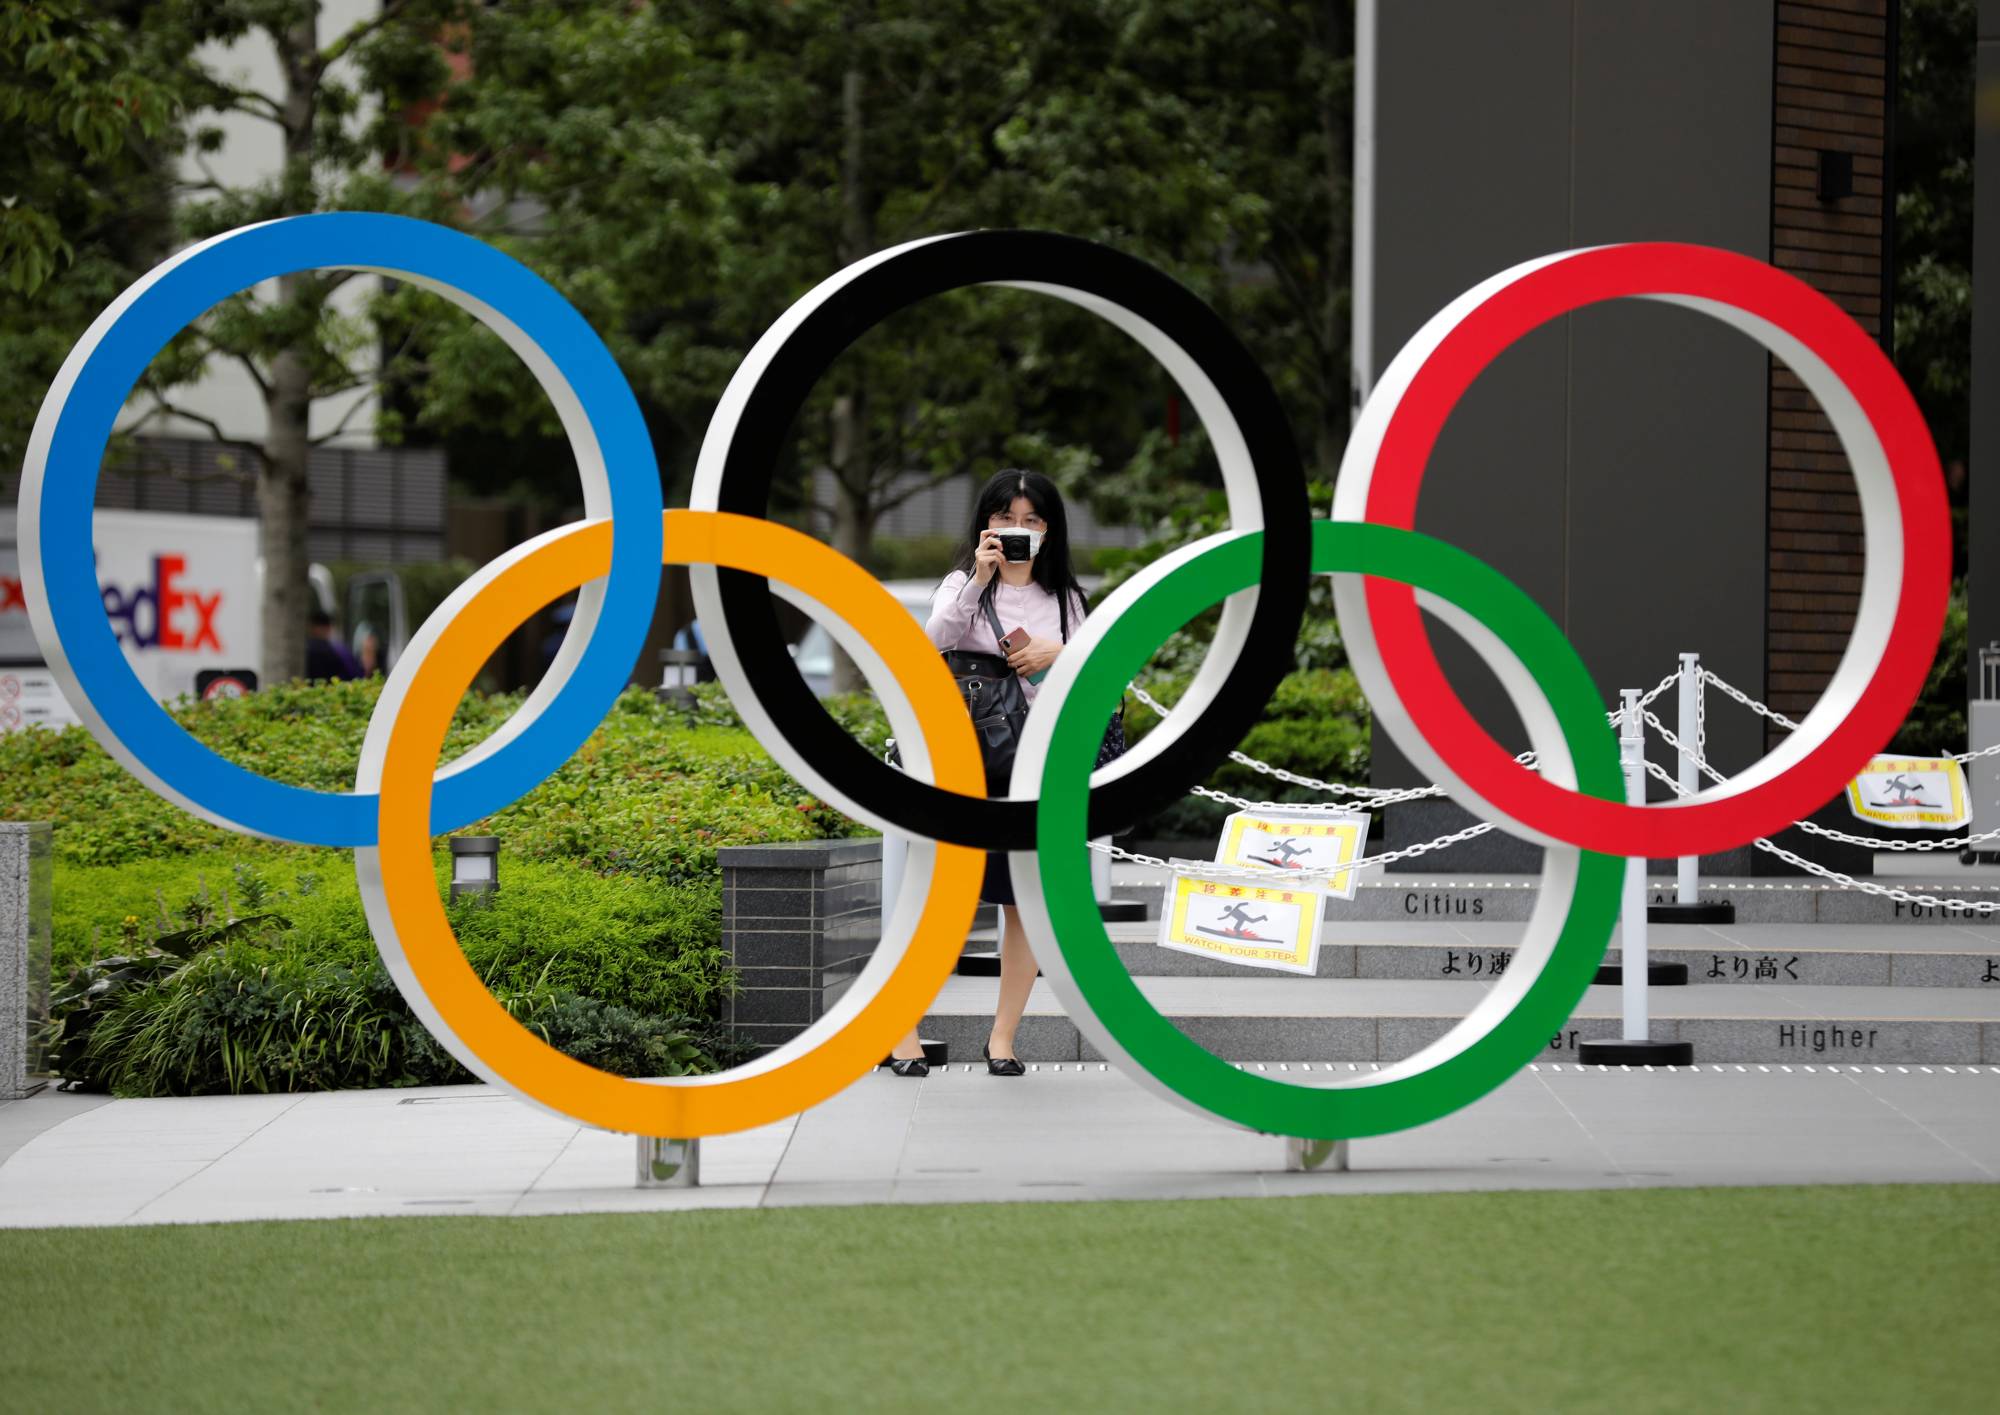 79% of volunteers worried about COVID-19 spread at Tokyo Olympics